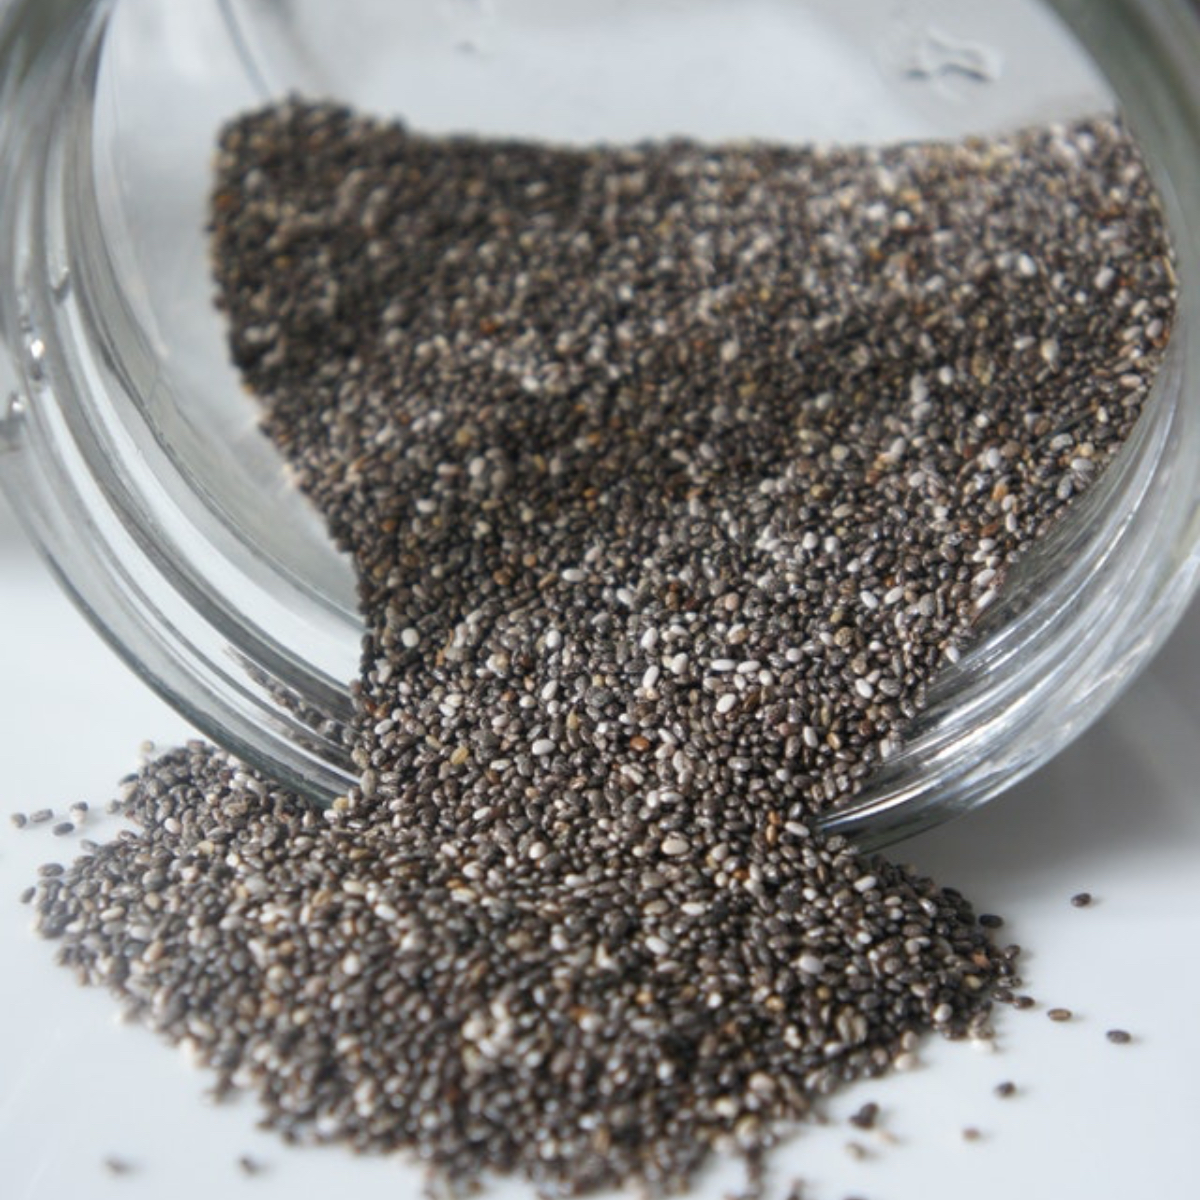 3 Ways Chia Seeds improves your skin and hair & why you should include this superfood in your diet 